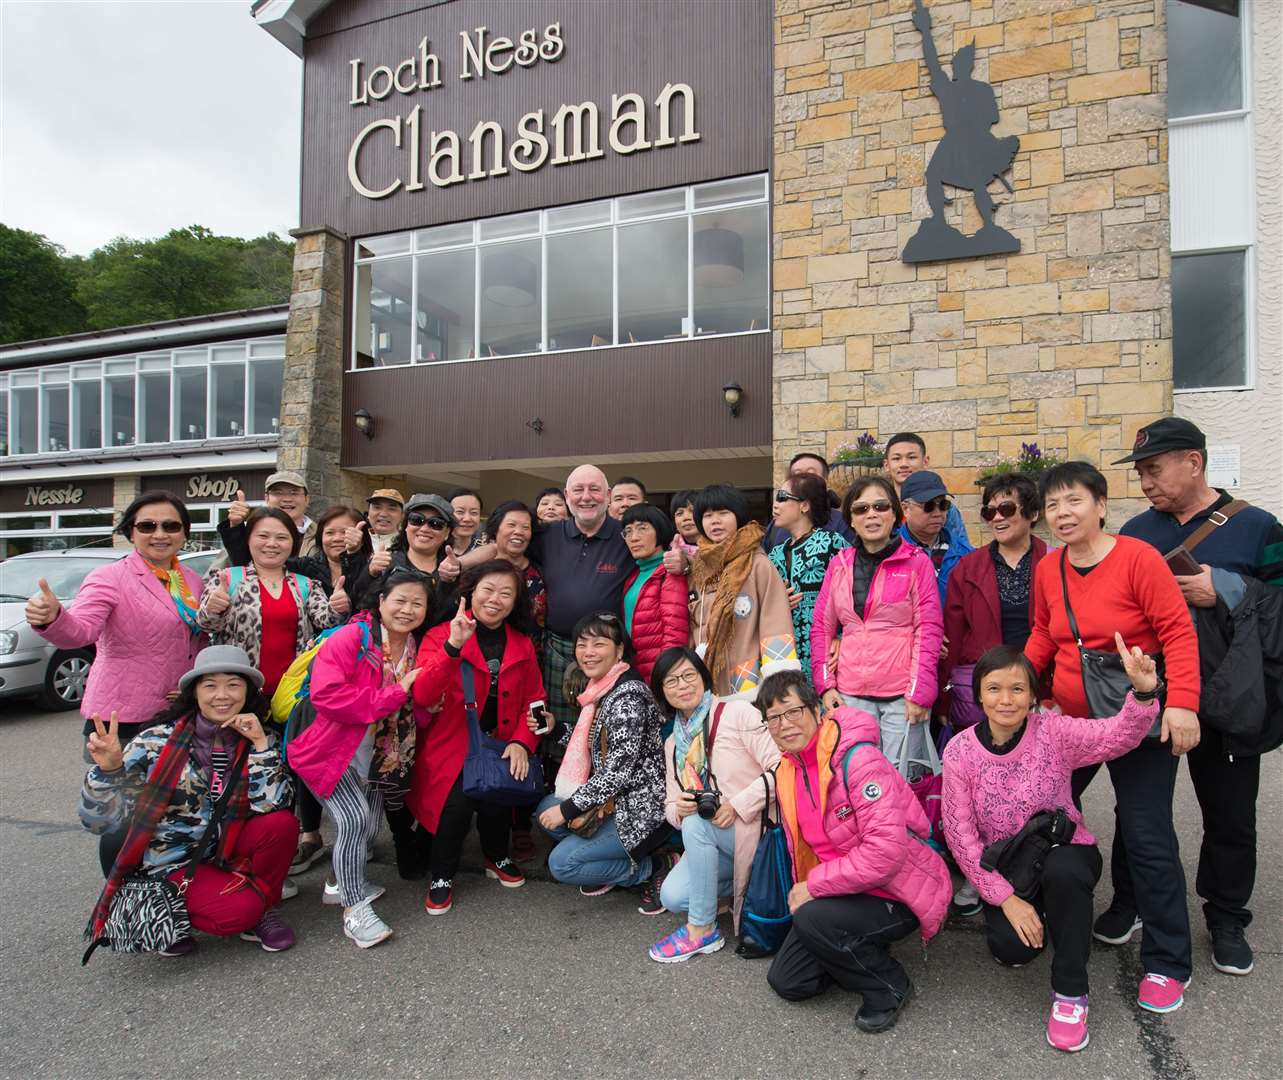 Chinese tourists visit the Clansman Hotel...Picture: Callum Mackay. Image No. 038220.